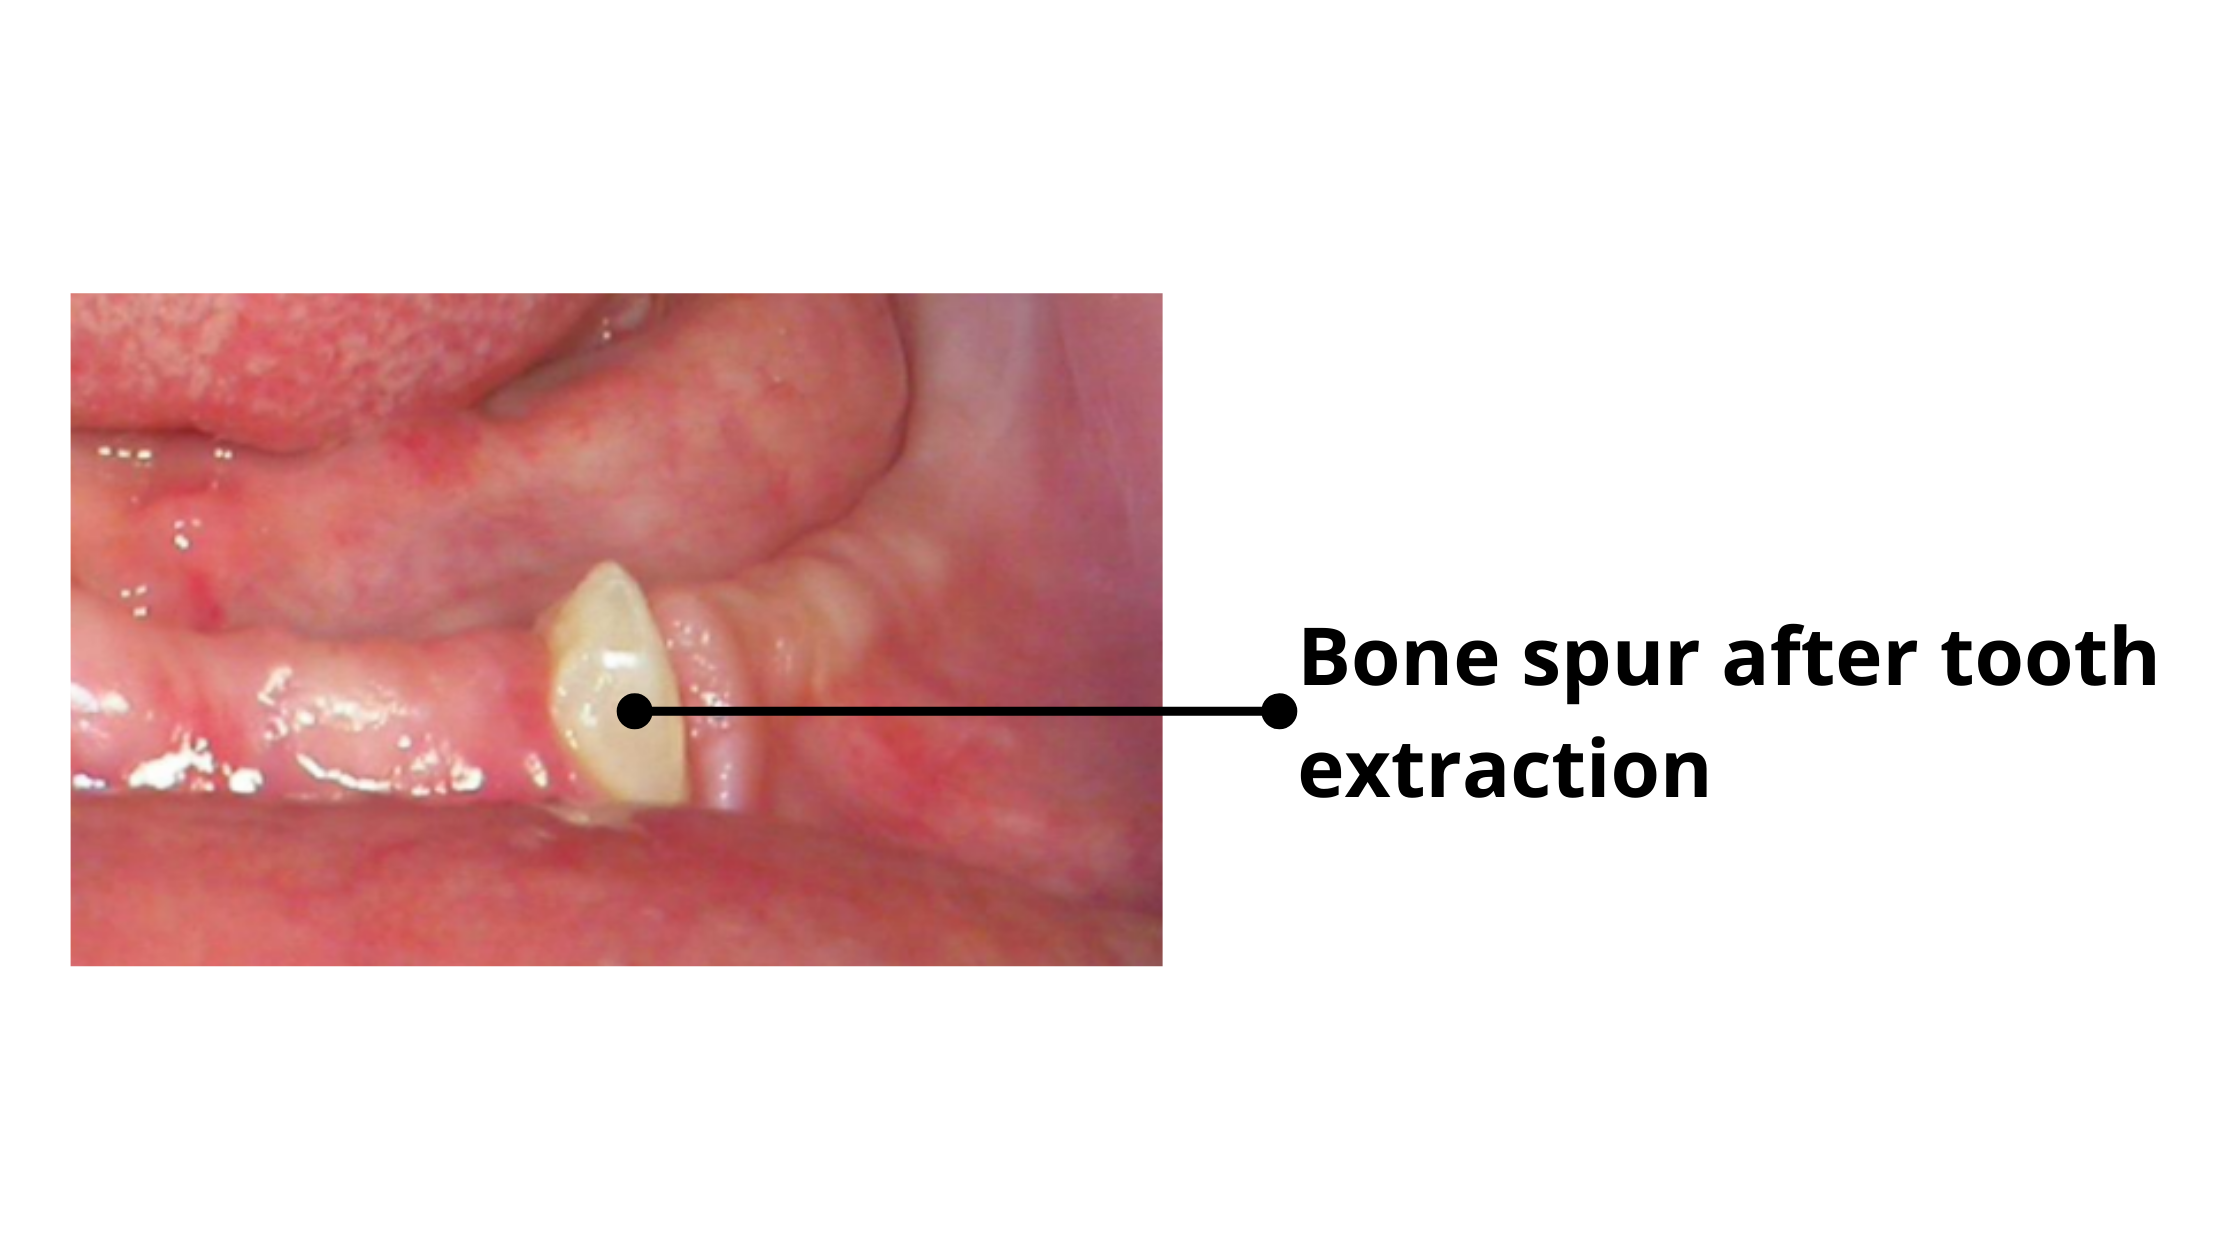 Clinical image of bone spur showing up after tooth extraction